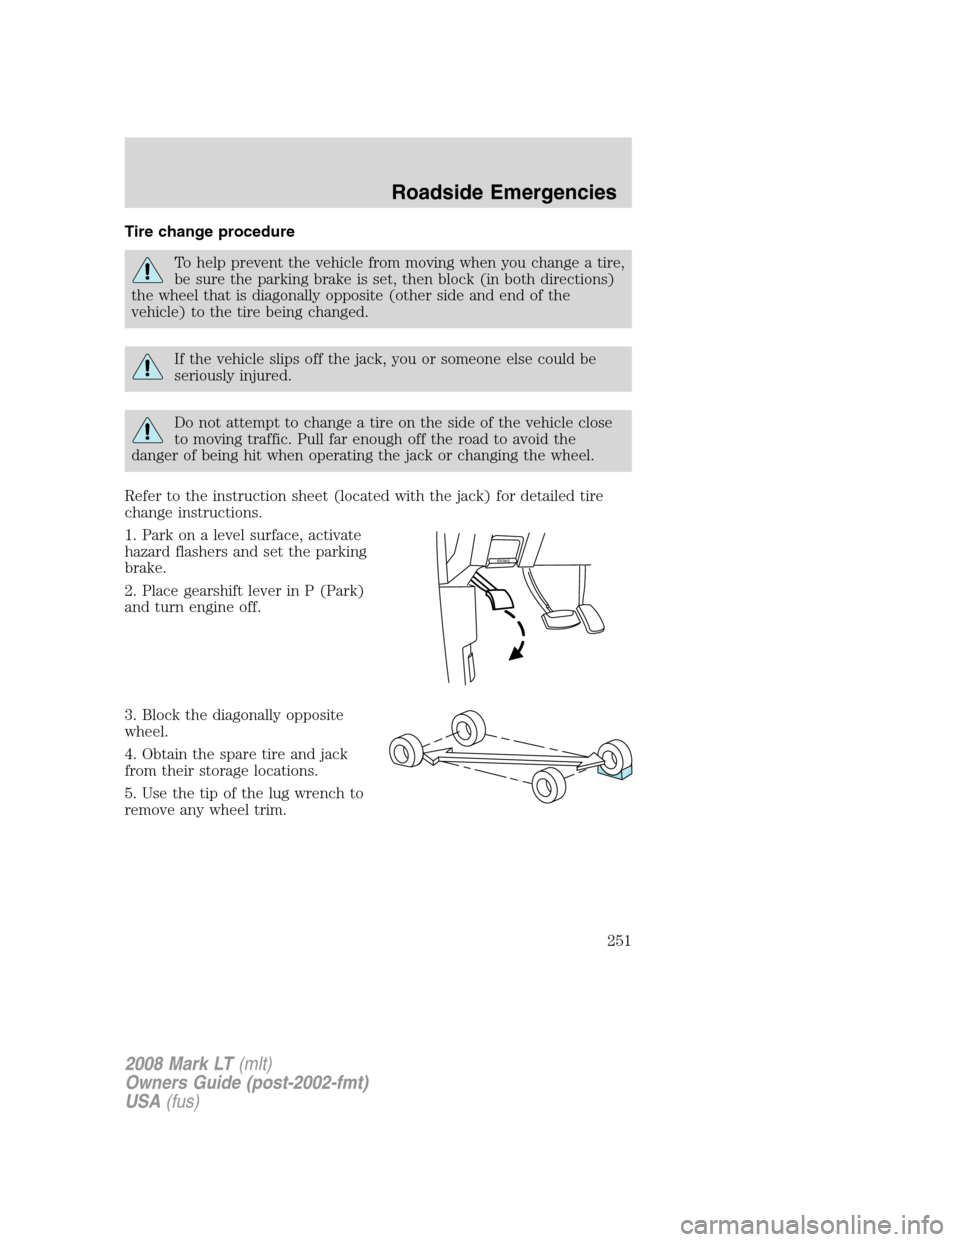 LINCOLN MARK LT 2008  Owners Manual Tire change procedure
To help prevent the vehicle from moving when you change a tire,
be sure the parking brake is set, then block (in both directions)
the wheel that is diagonally opposite (other sid